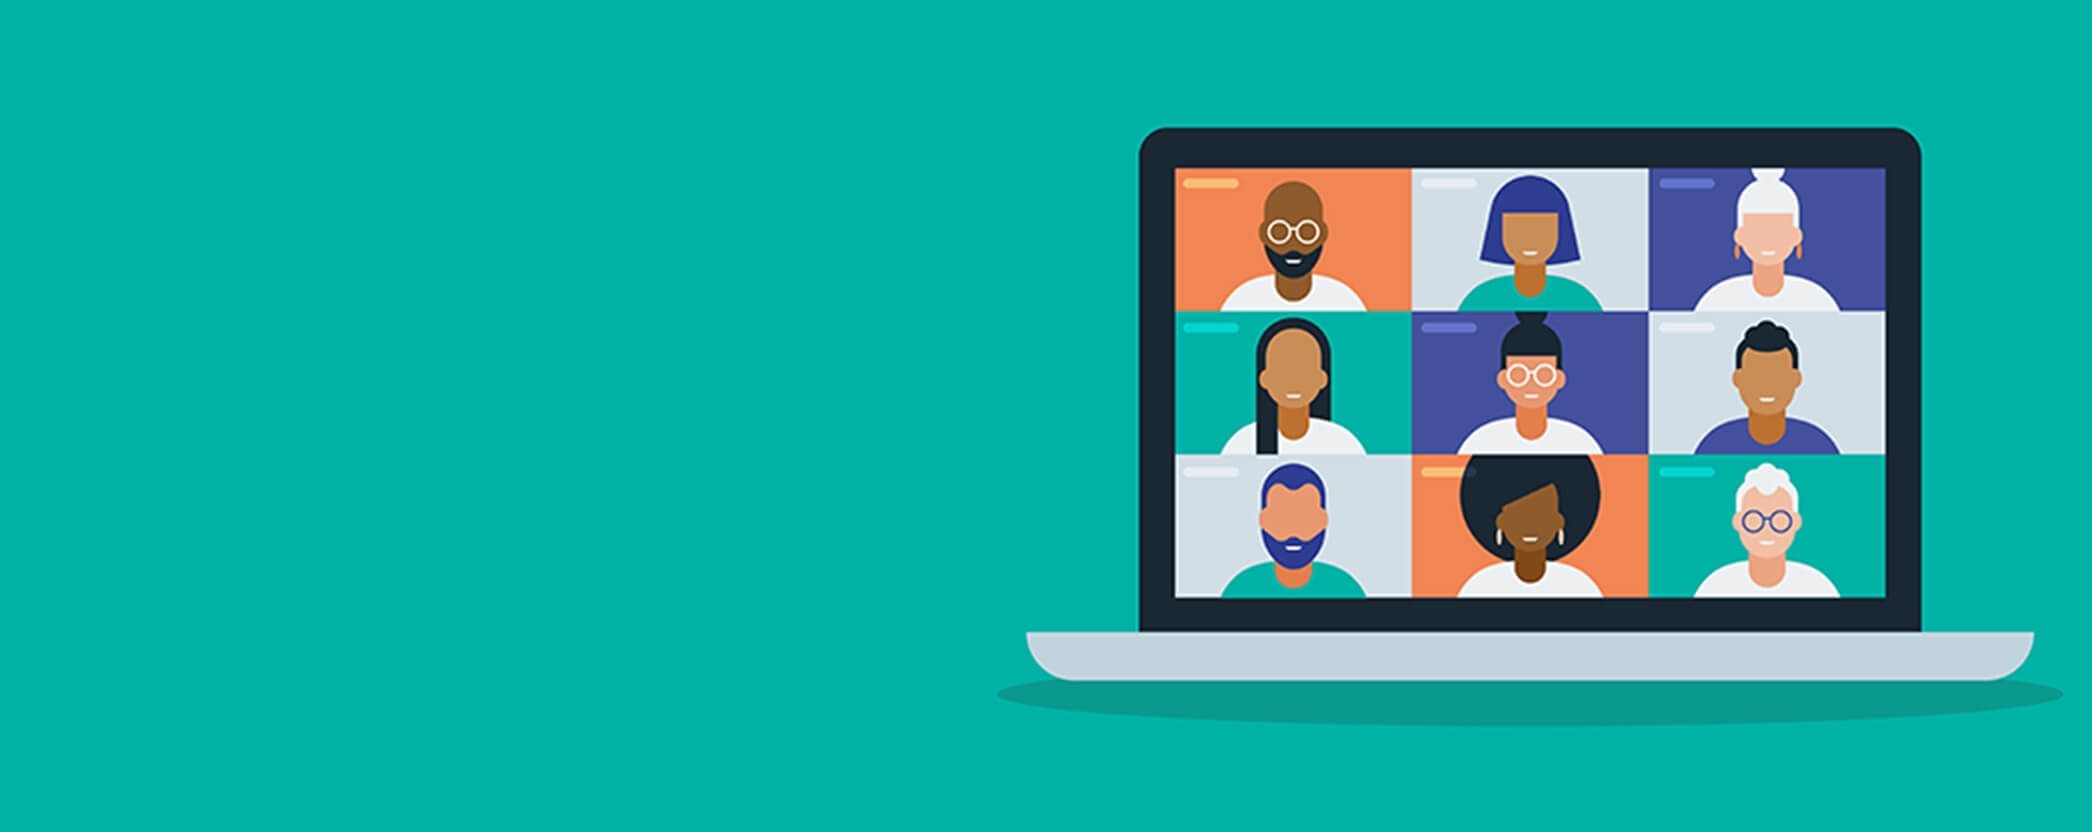 Illustration of a diverse group of webinar participants on a laptop screen against a teal background.